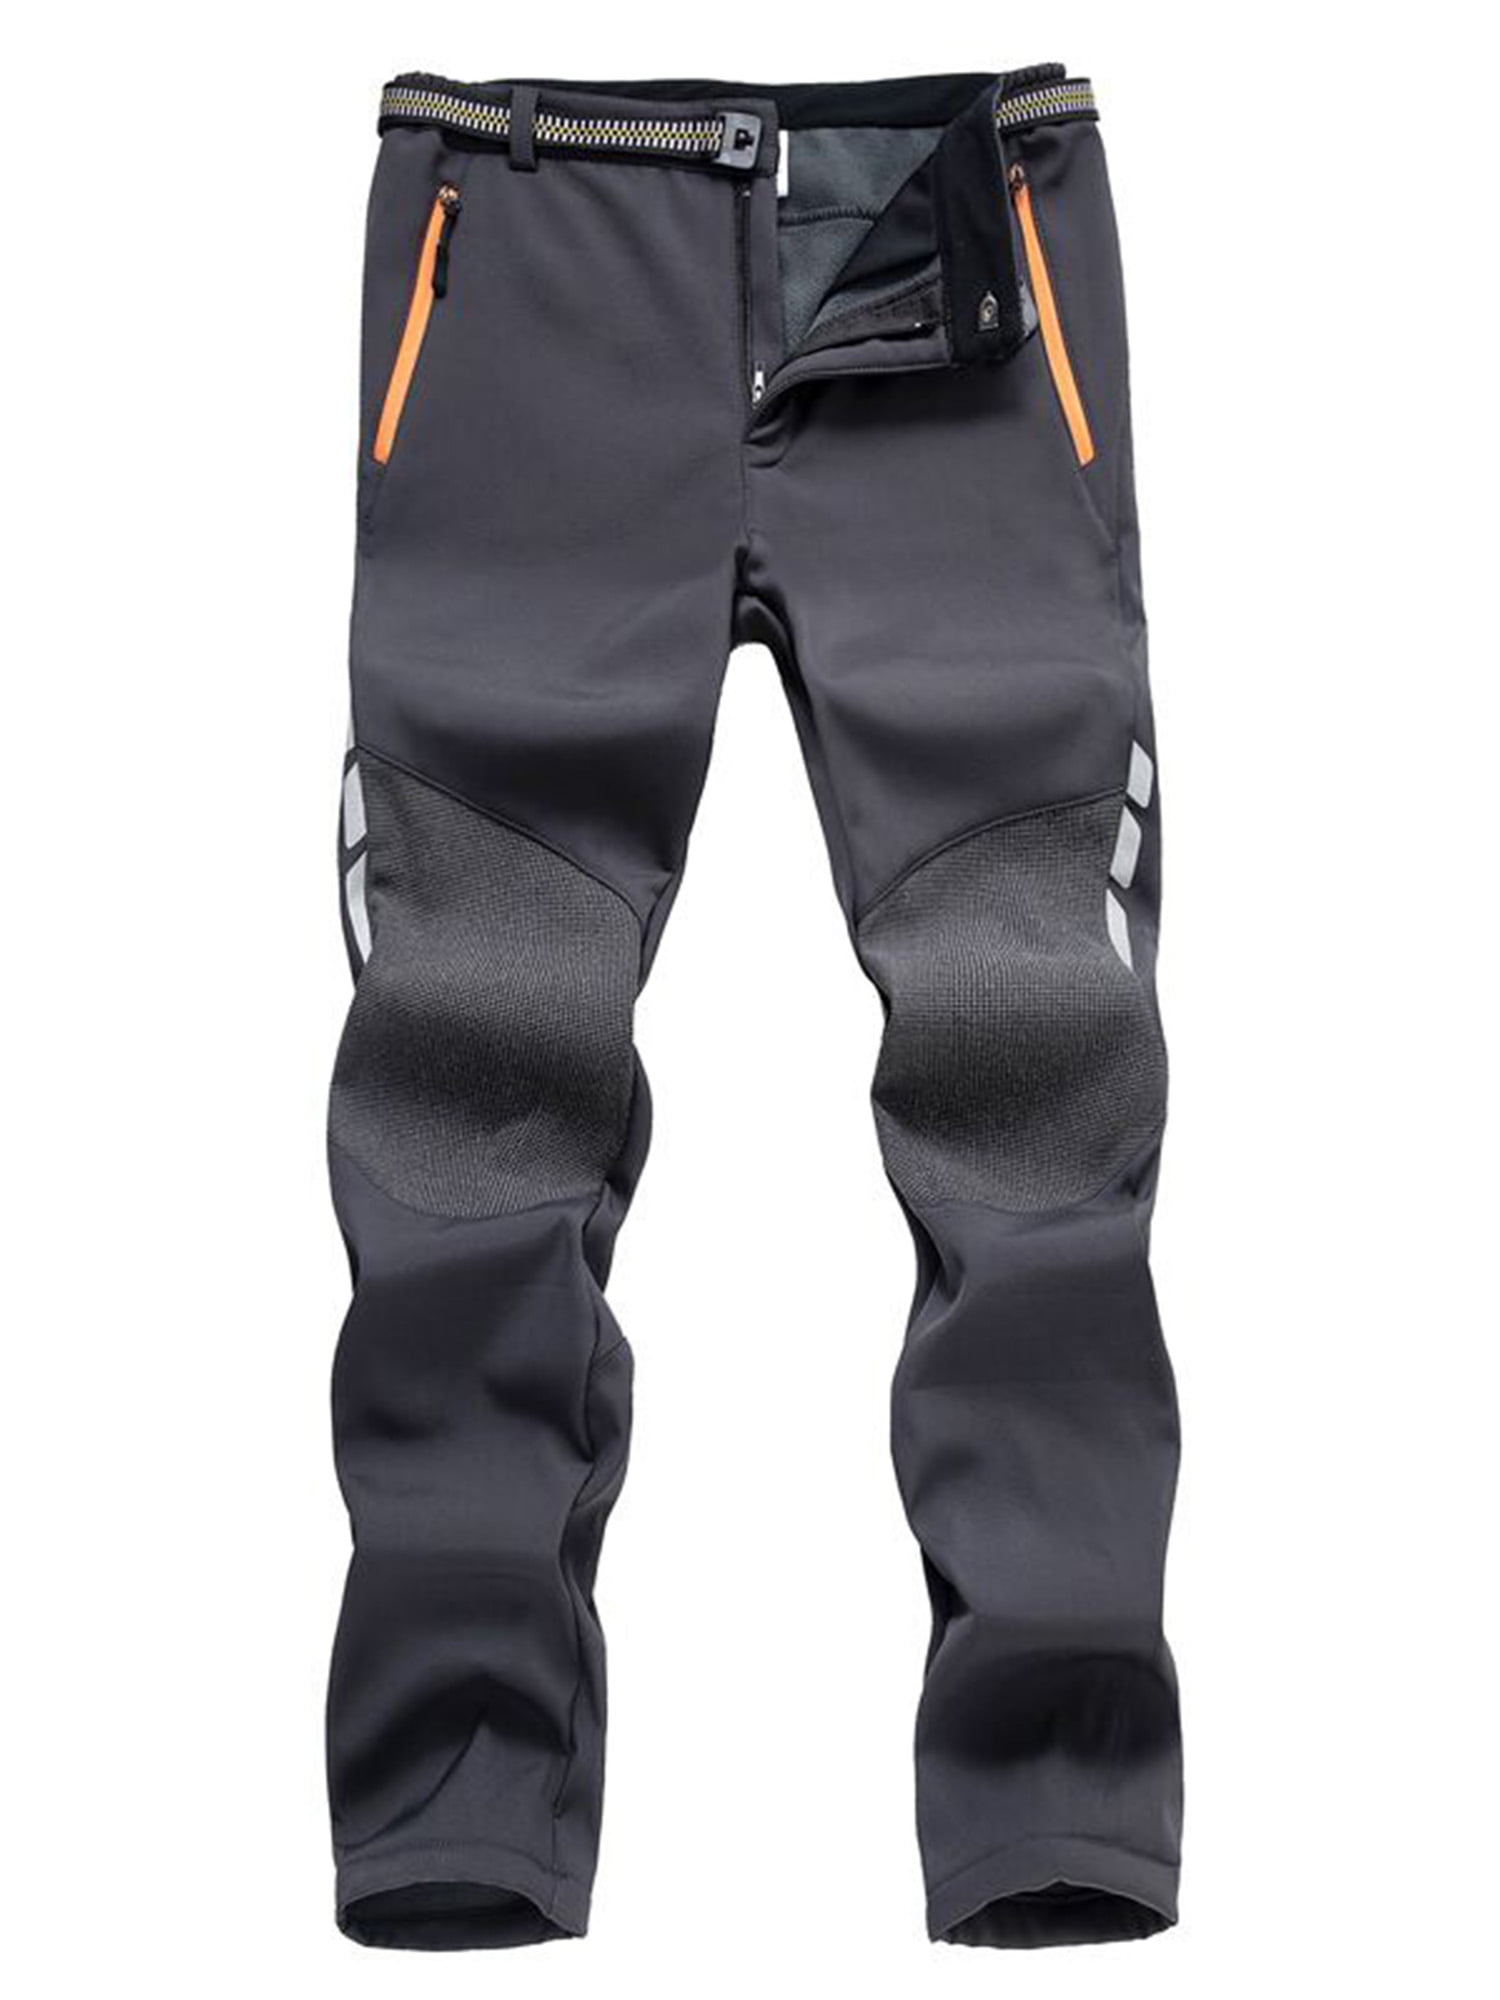 Result Fleece Lined Soft Shell Waterproof Breathable BLACK Trousers 